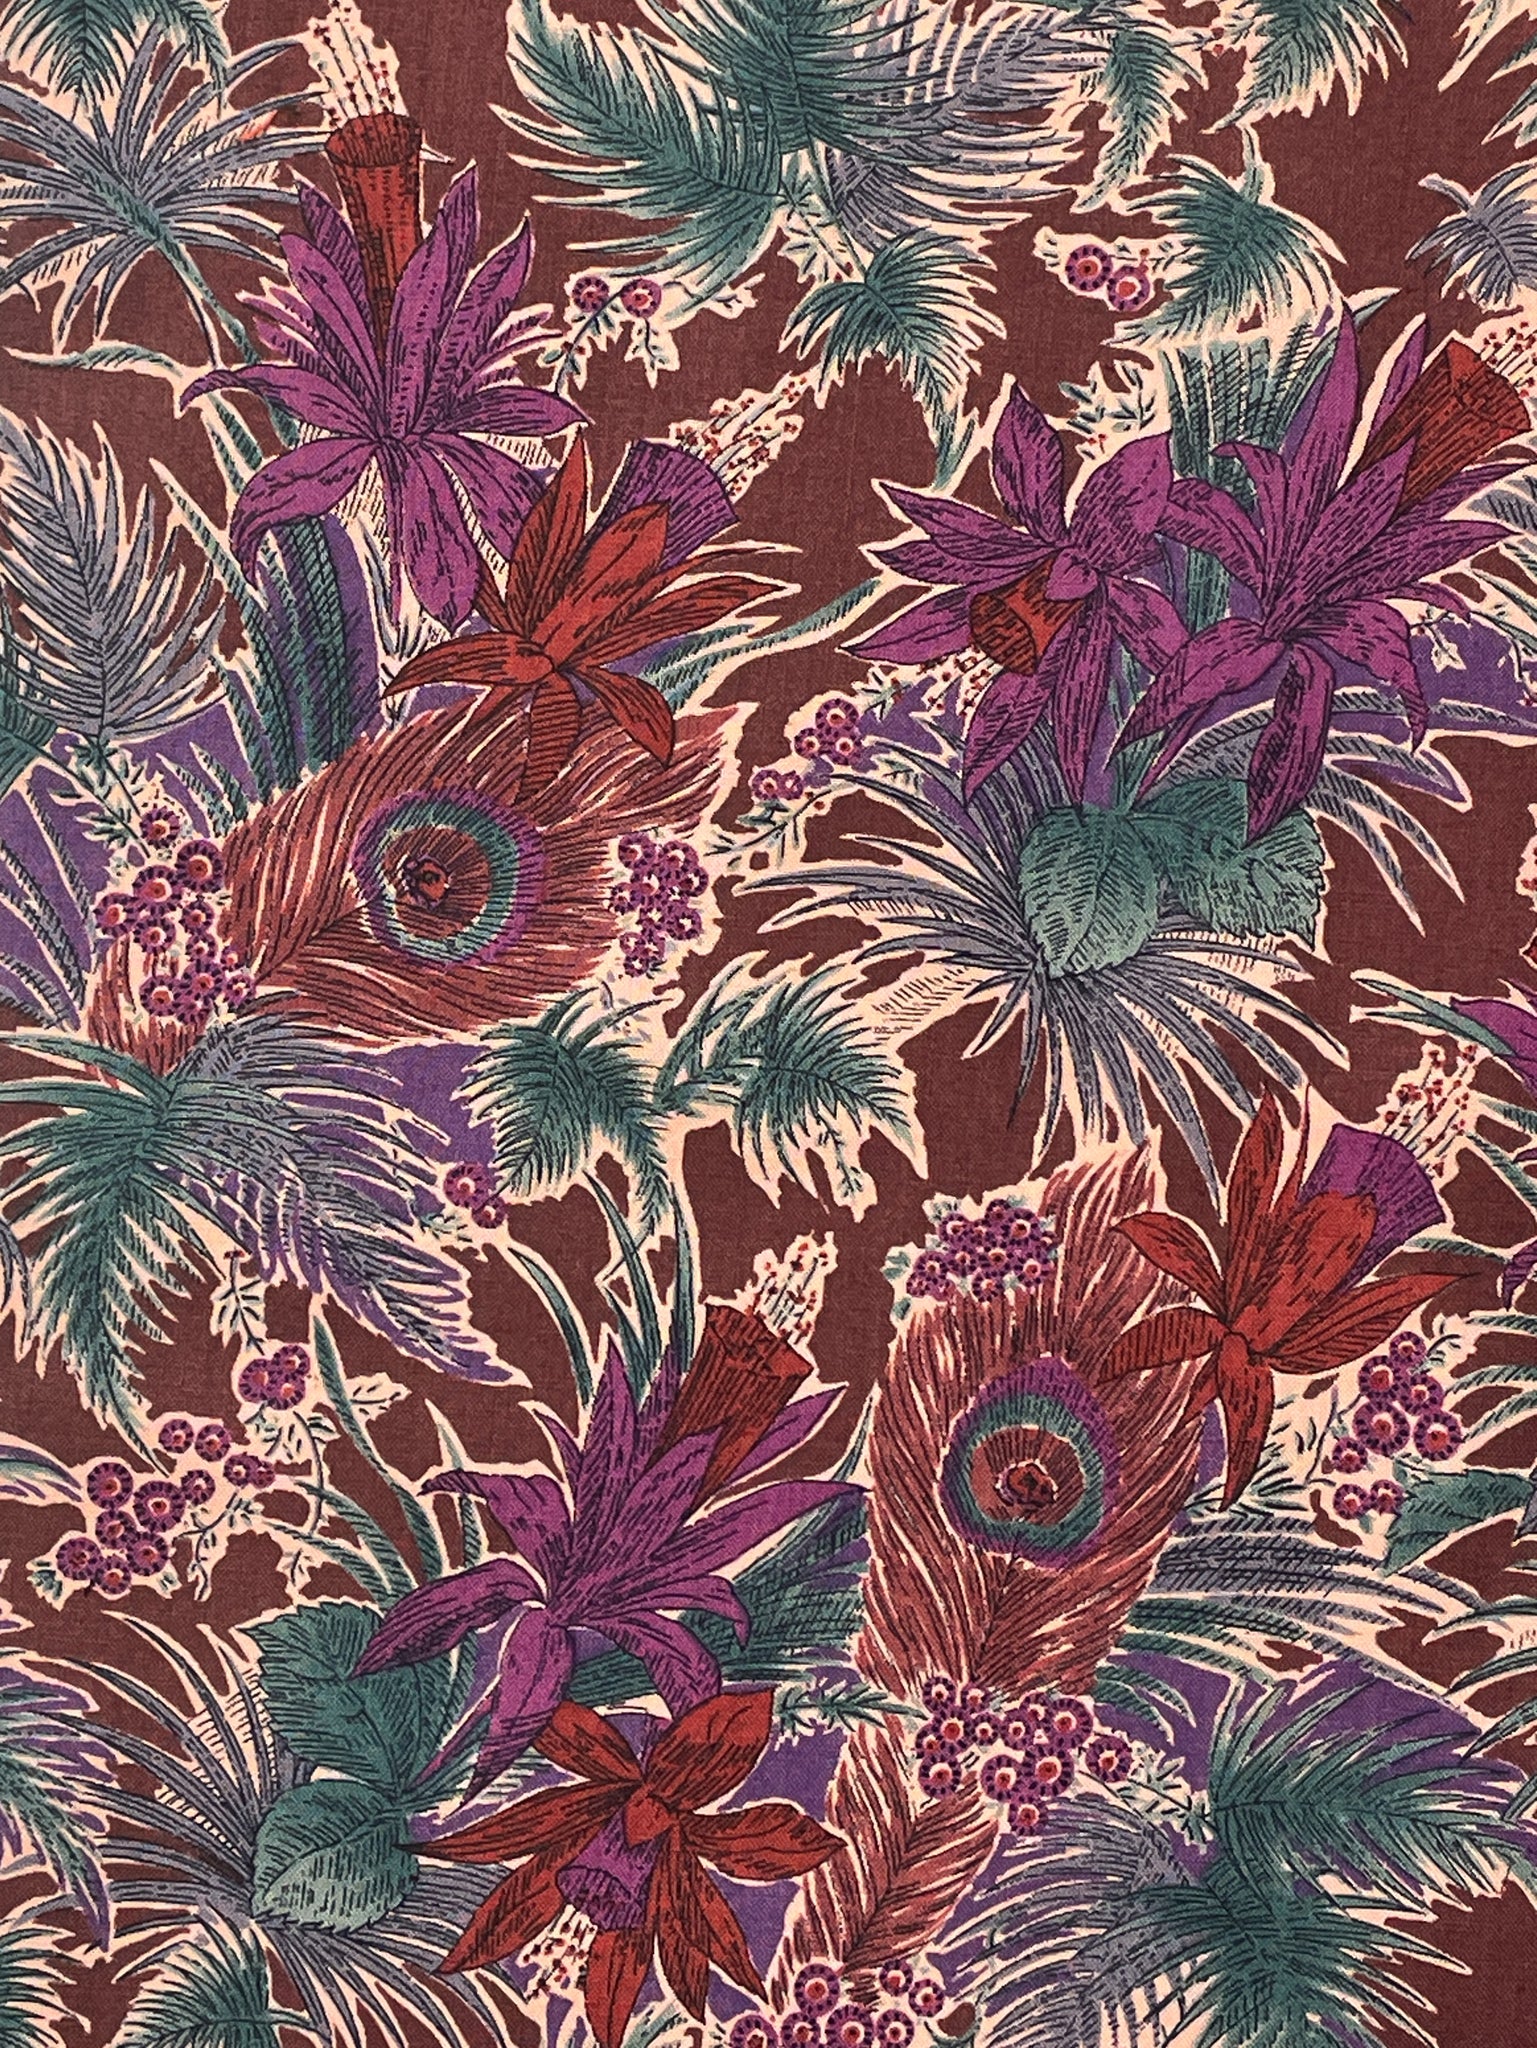 3 7/8 Quilting Cotton Vintage - Burgundy with Red, Purple and Teal Flowers